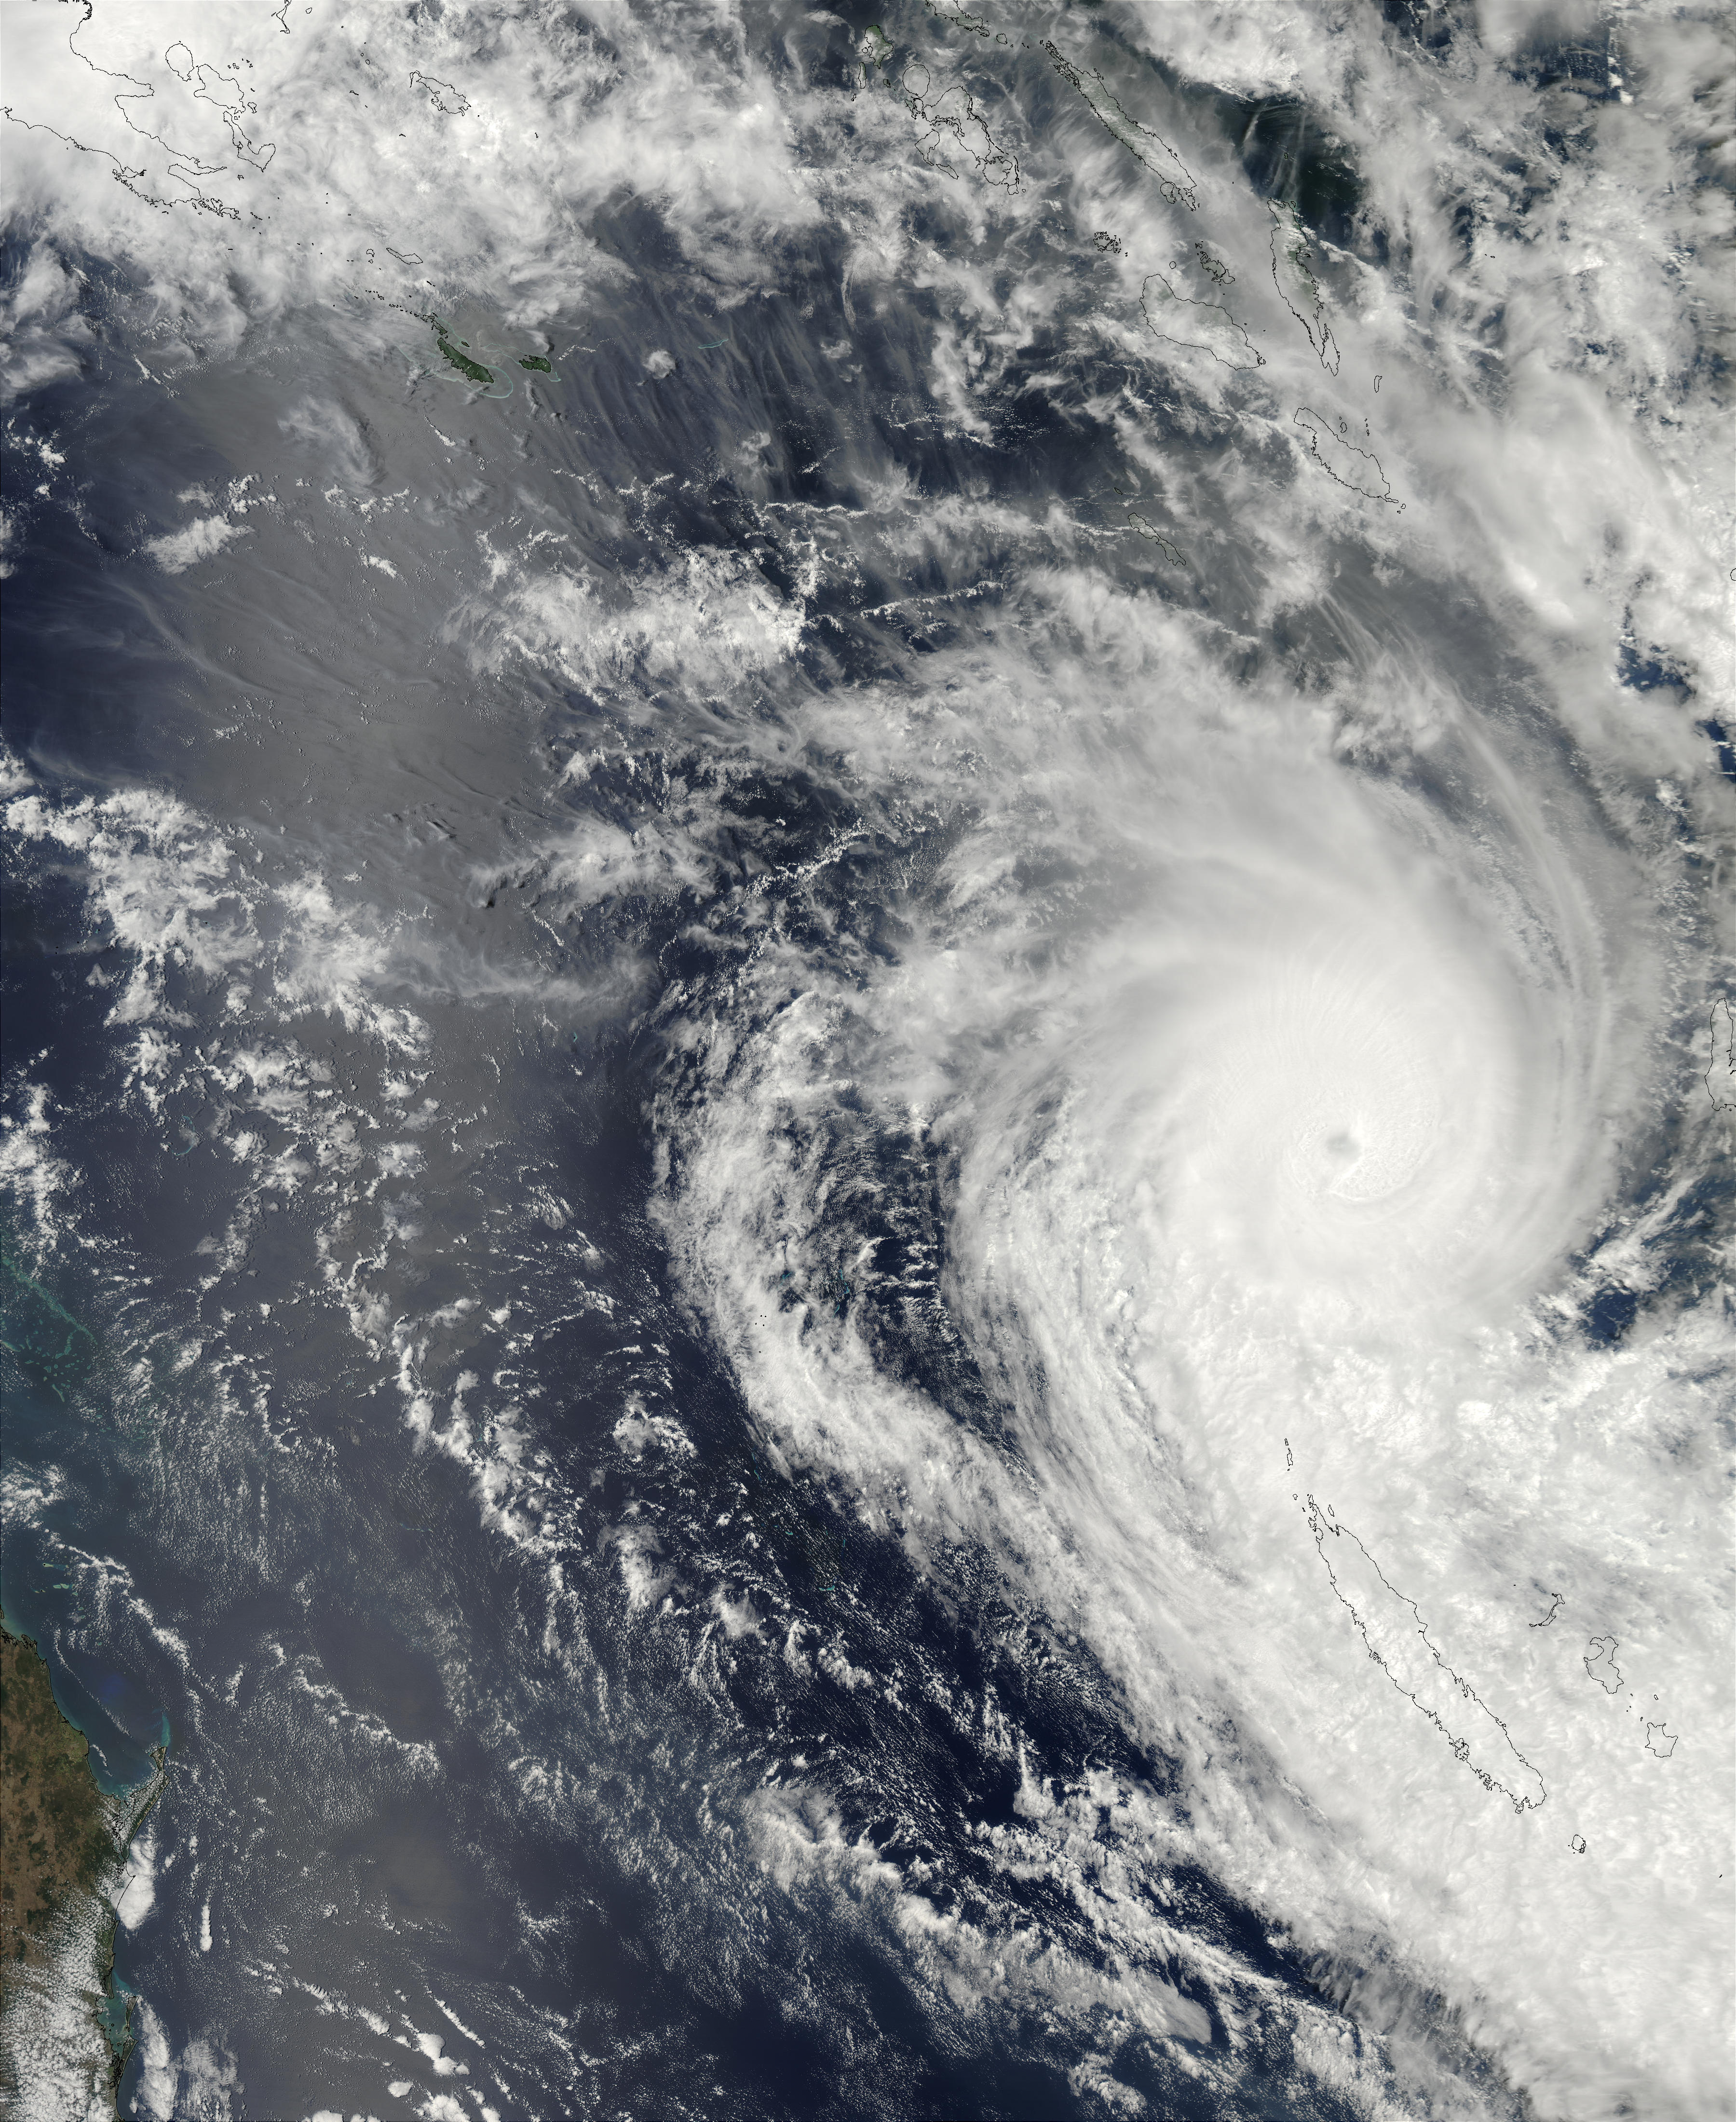 Tropical Cyclone Beni (12P), north of New Caledonia, Pacific Ocean - related image preview